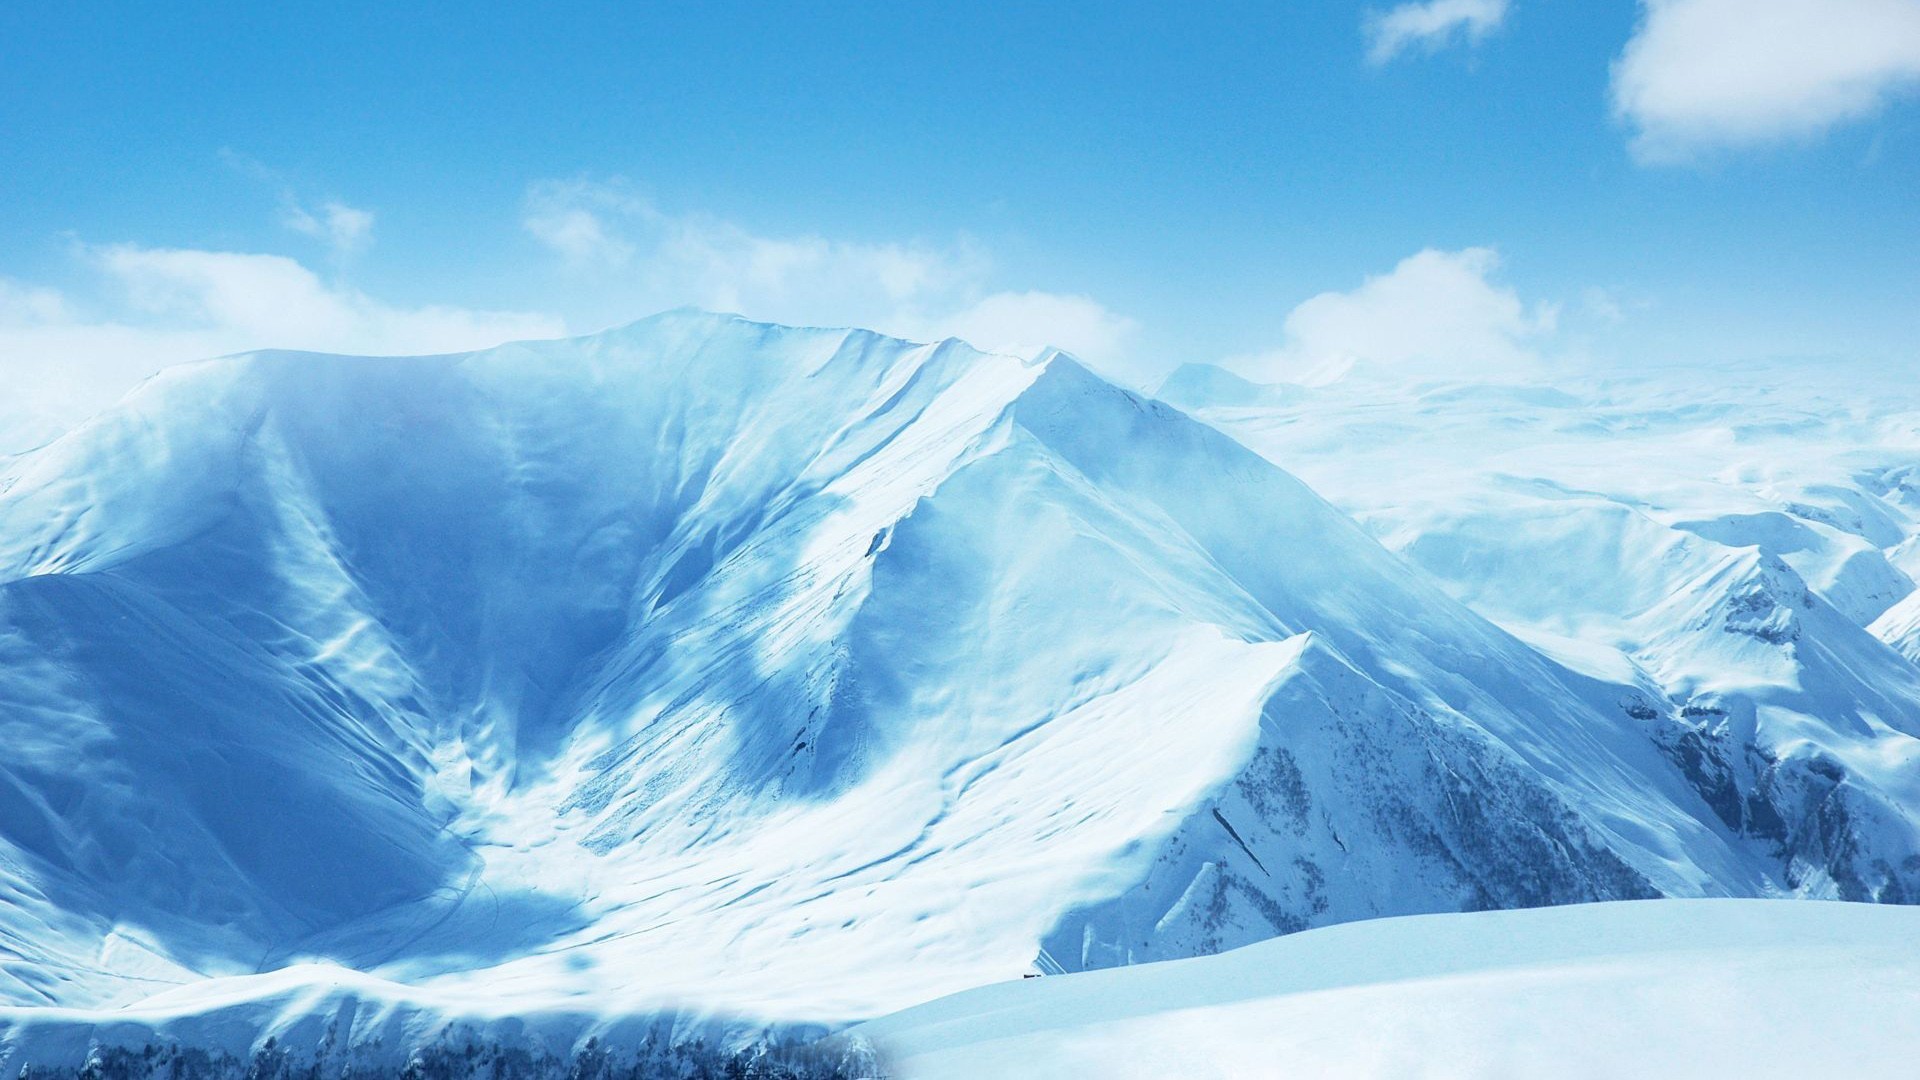 General 1920x1080 mountains snow cold white blue nature cyan sky clear sky